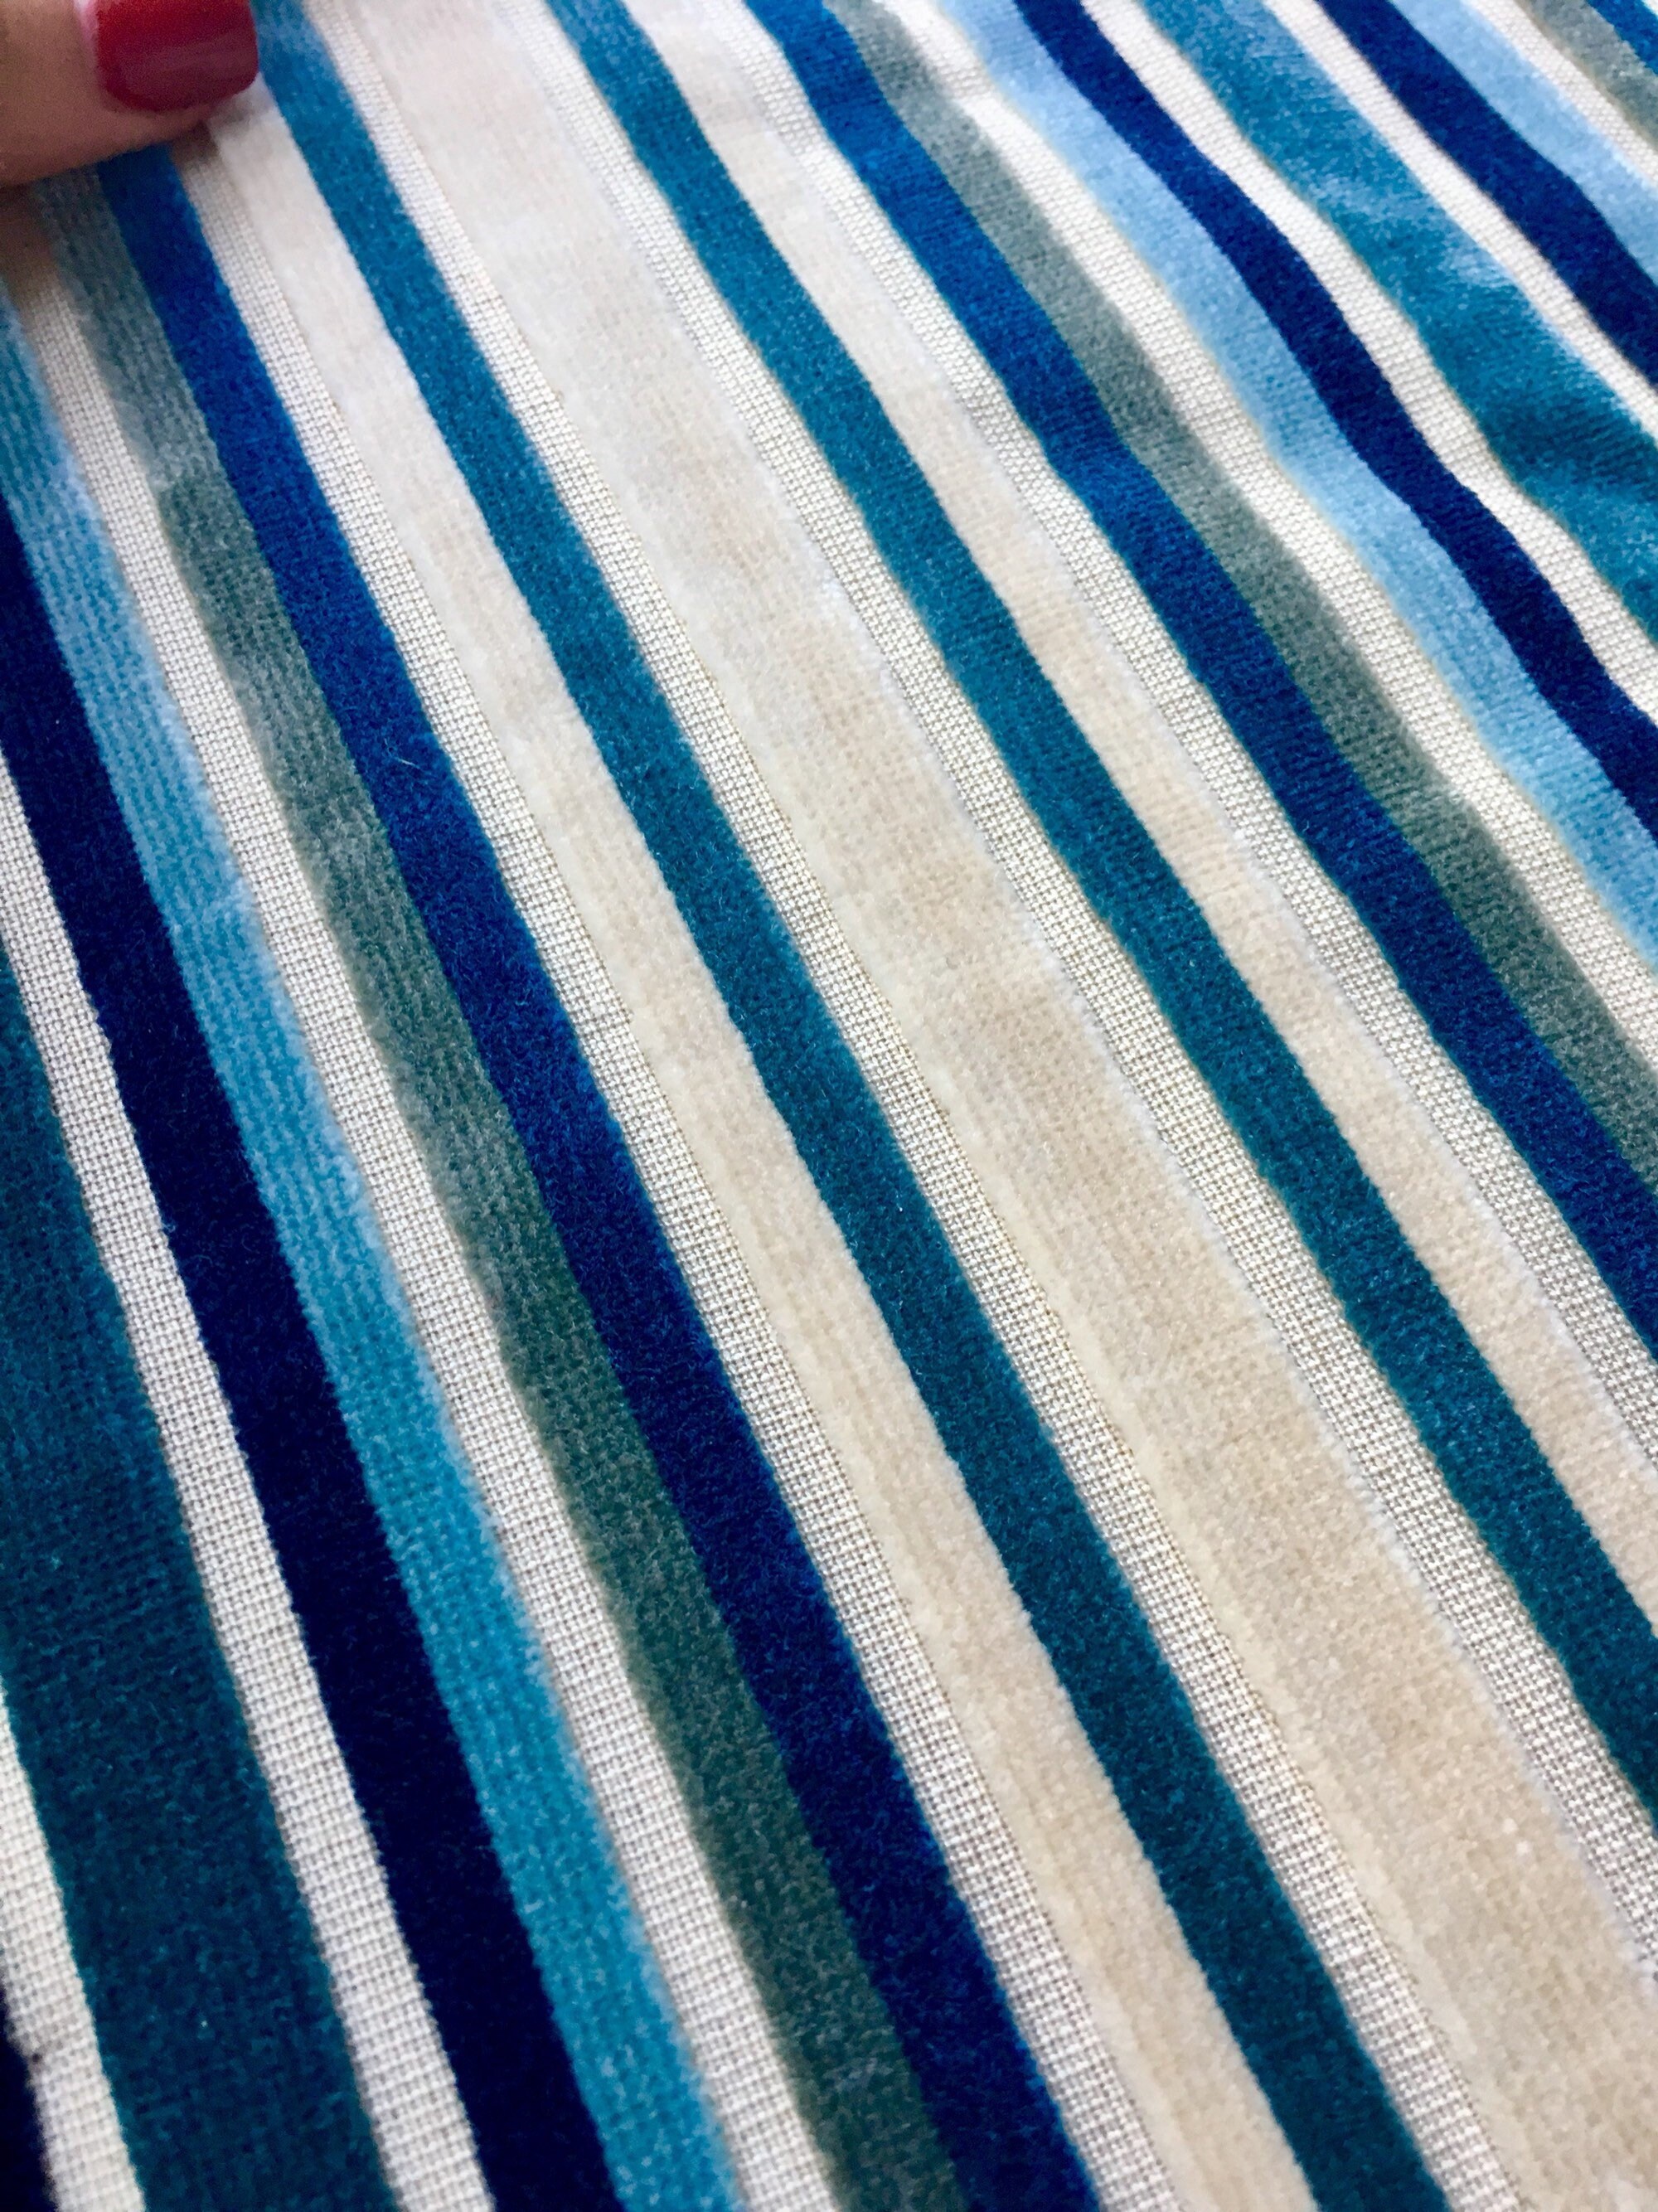 Striped Upholstery Fabric, Velvet Look Fabric by Yard, Boho Fabric With  Stripes, Digital Printed Fabric for Chair Sofa Curtain Tablecloth 